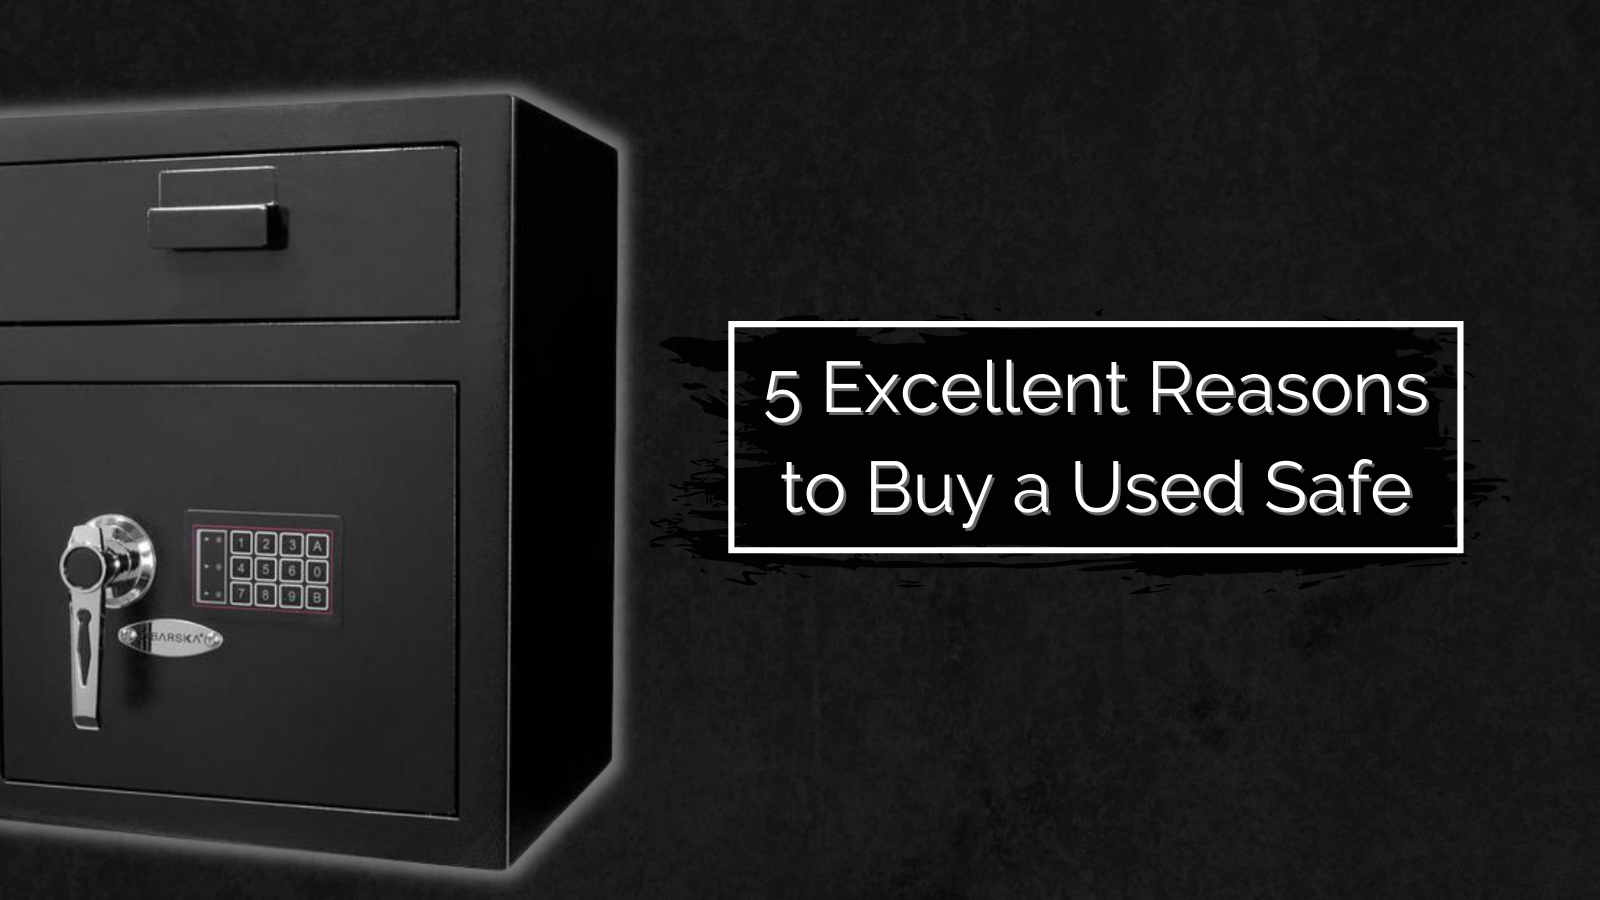 5 Excellent Reasons to Buy a Used Safe